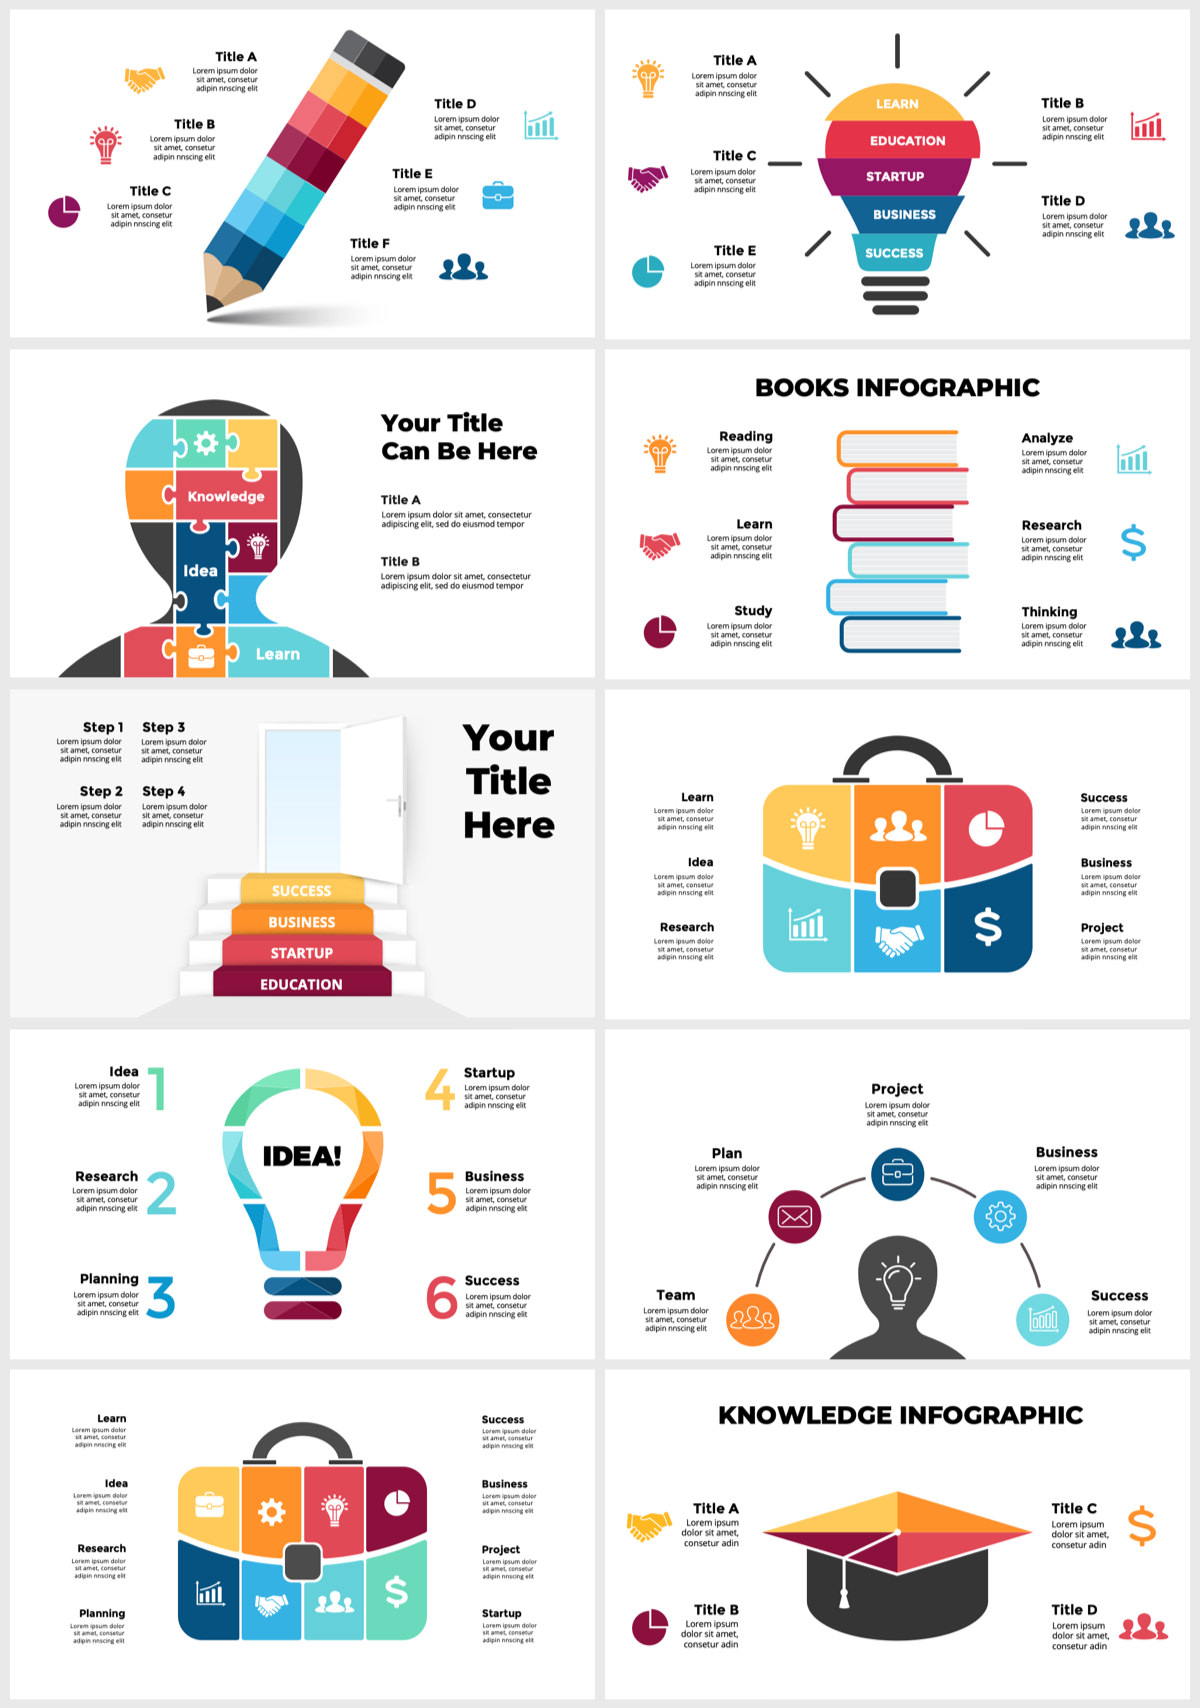 Wowly - 3500 Infographics & Presentation Templates! Updated! PowerPoint Canva Figma Sketch Ai Psd. - 159